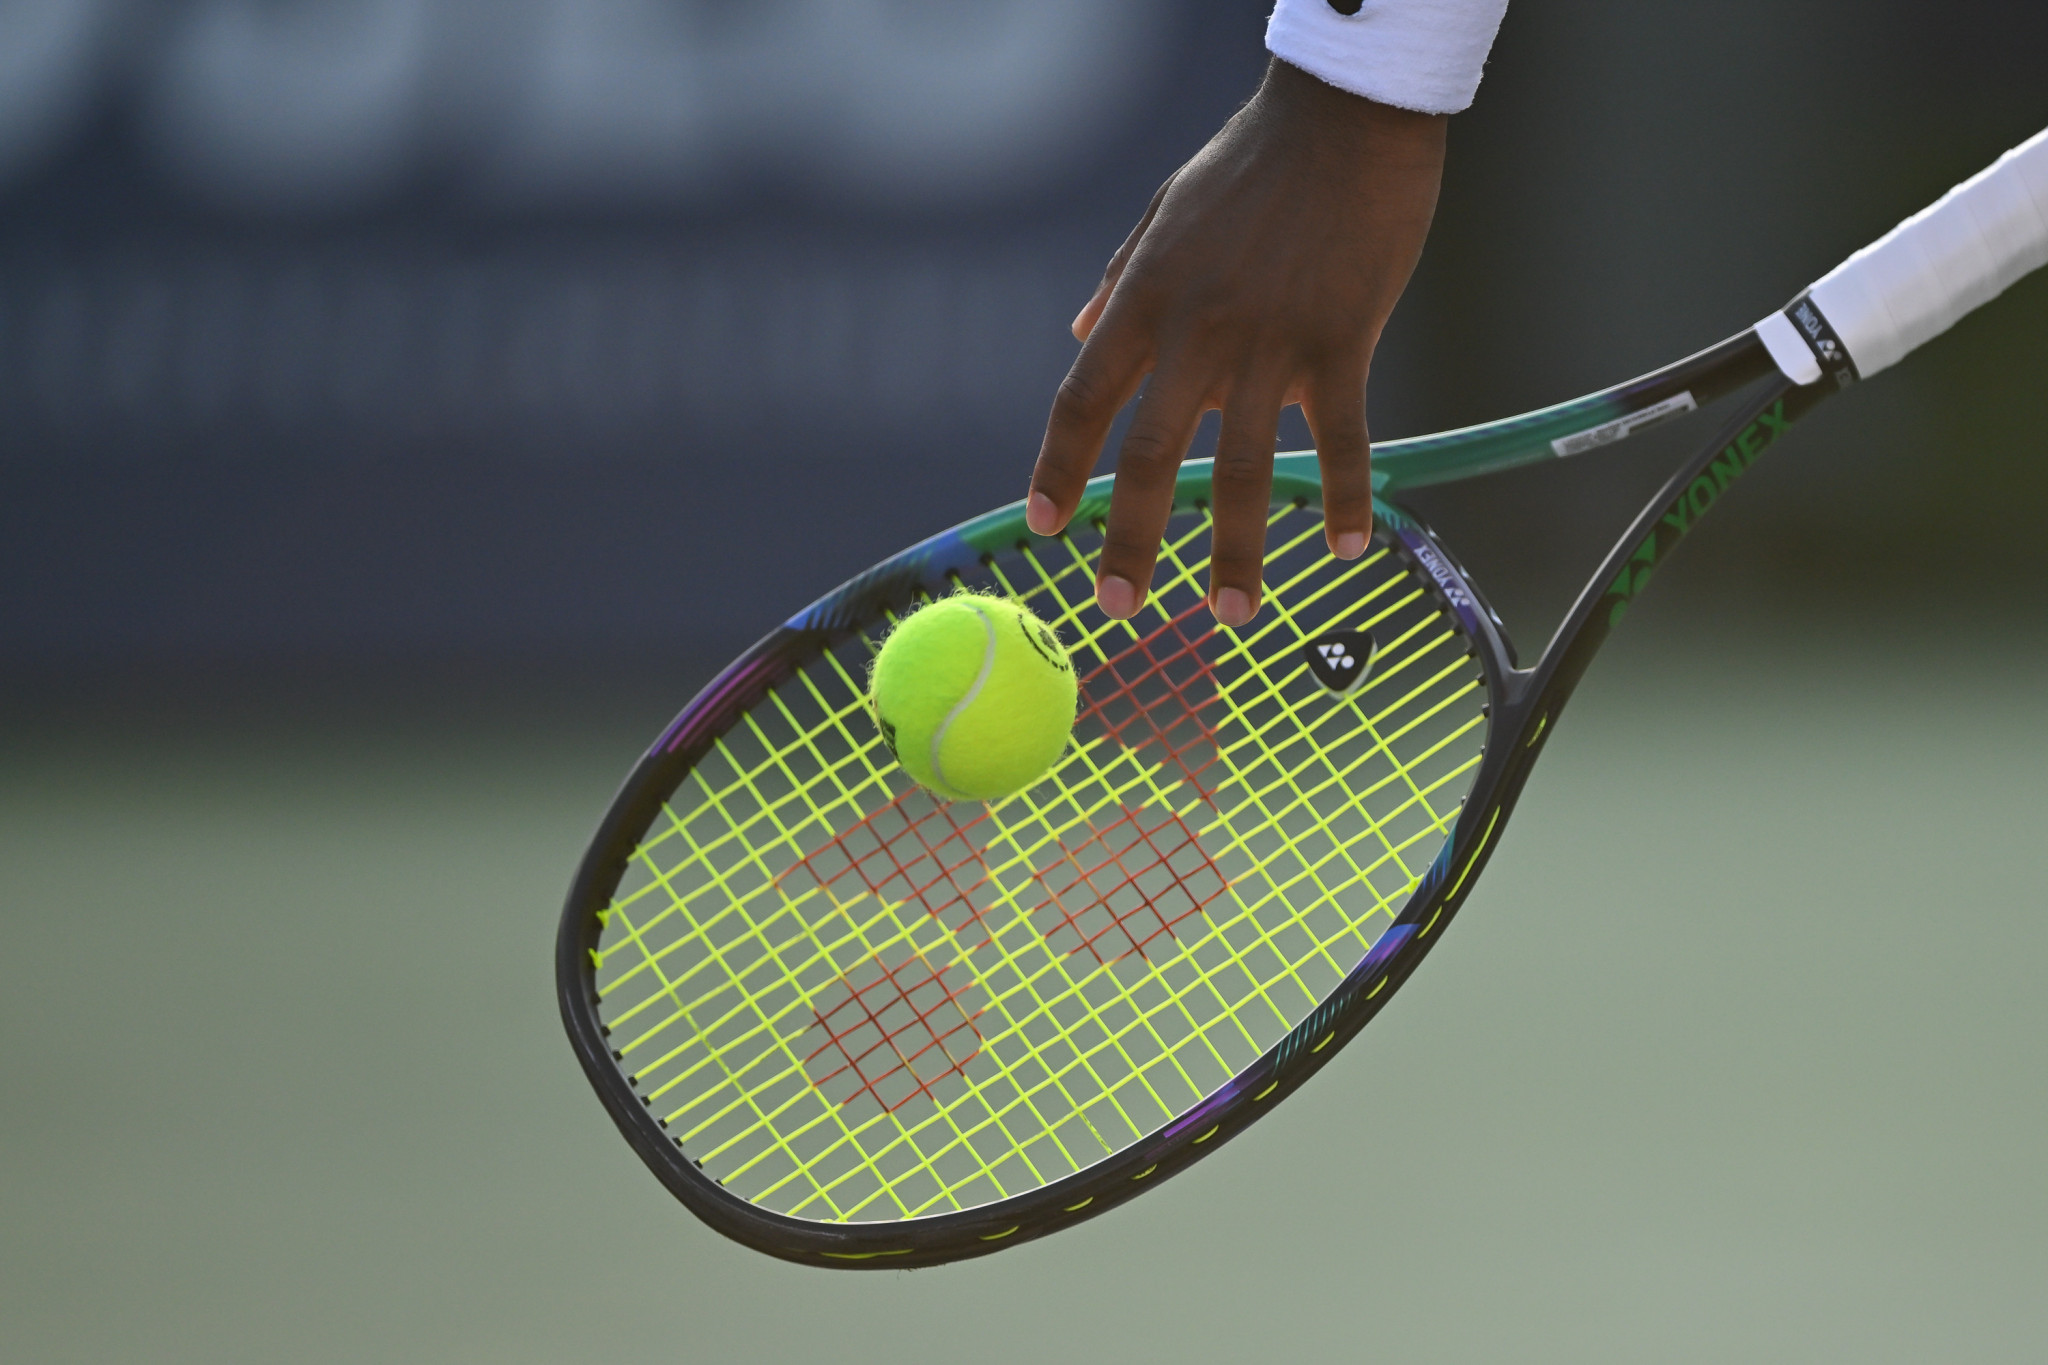 Moroccan tennis player Rachidi handed lifetime ban for match-fixing 